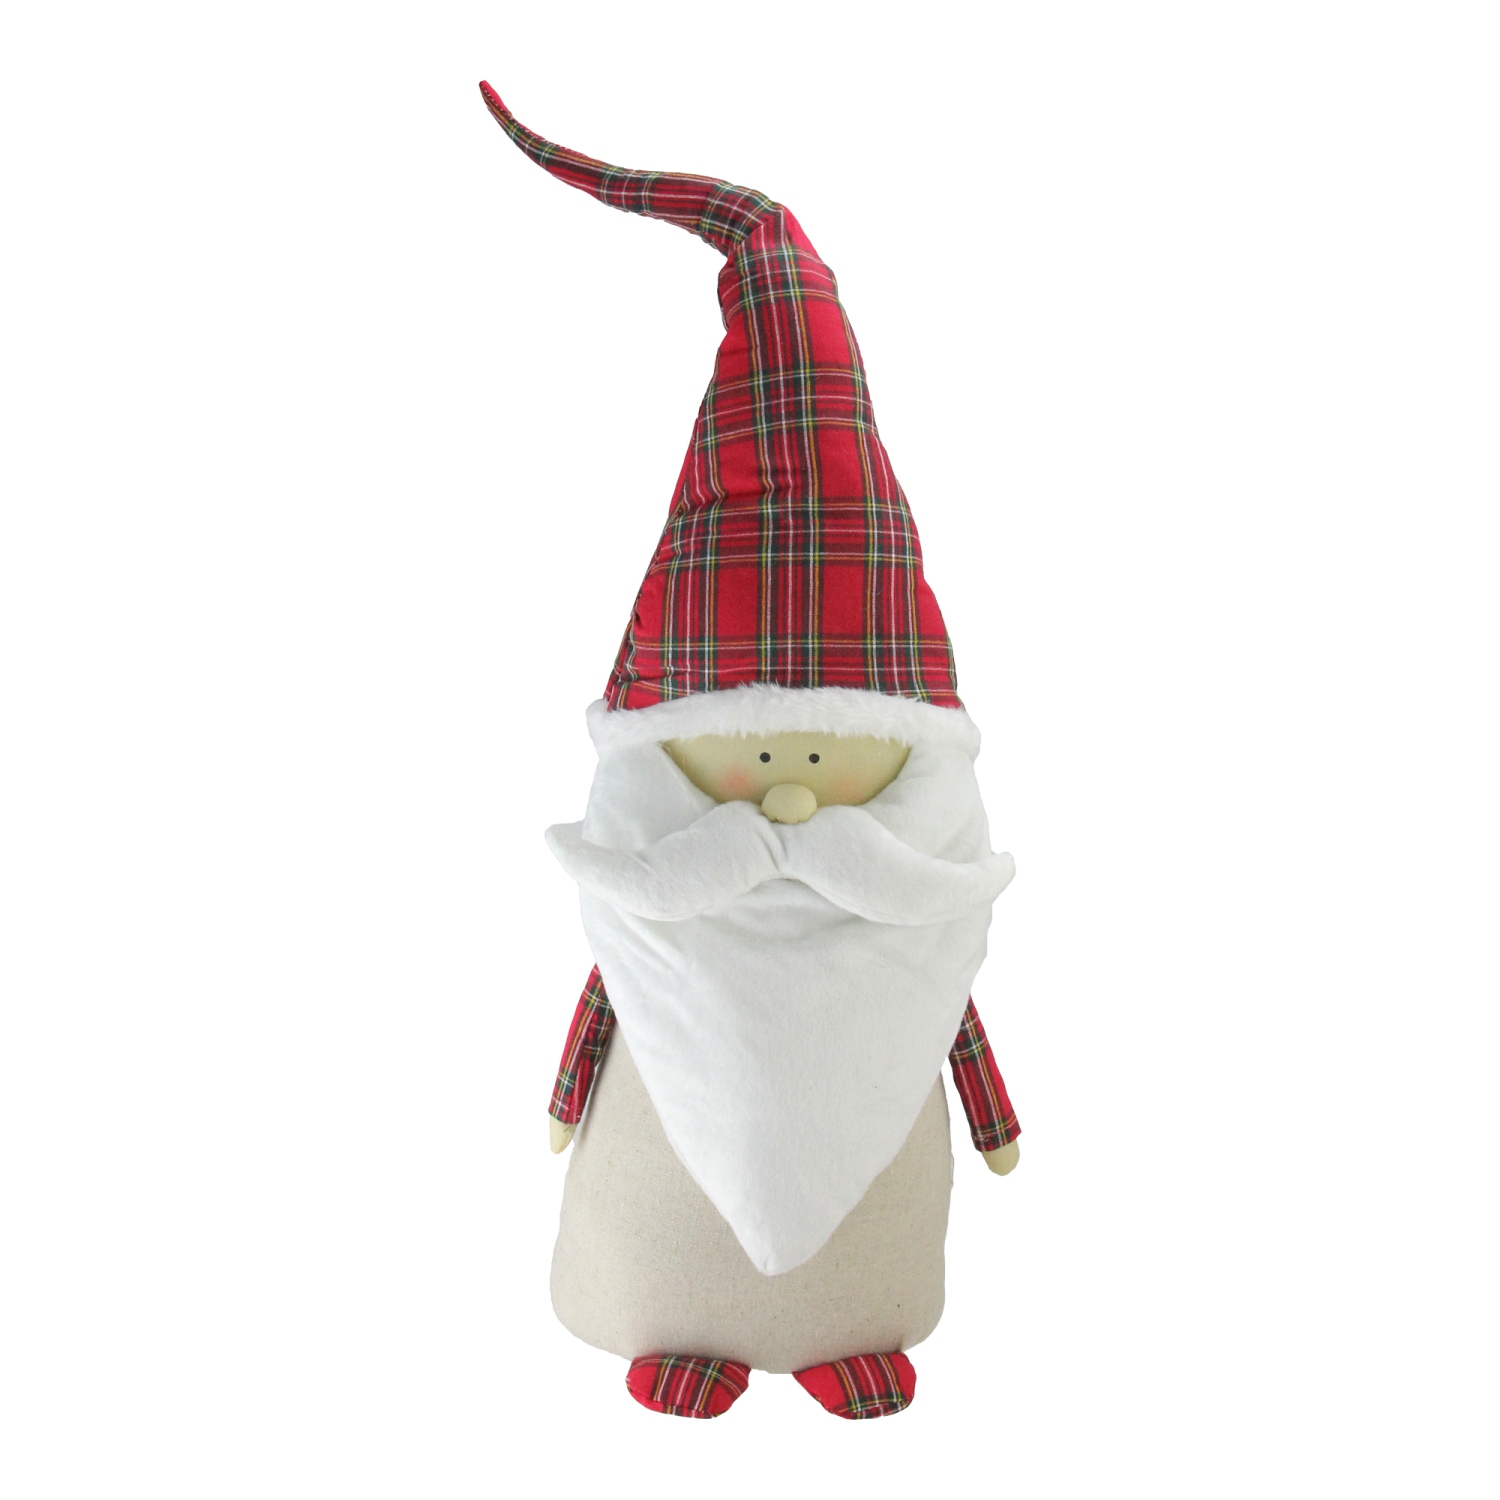 26" White and Red Santa Claus Gnome with Plaid Hat Christmas Figurine